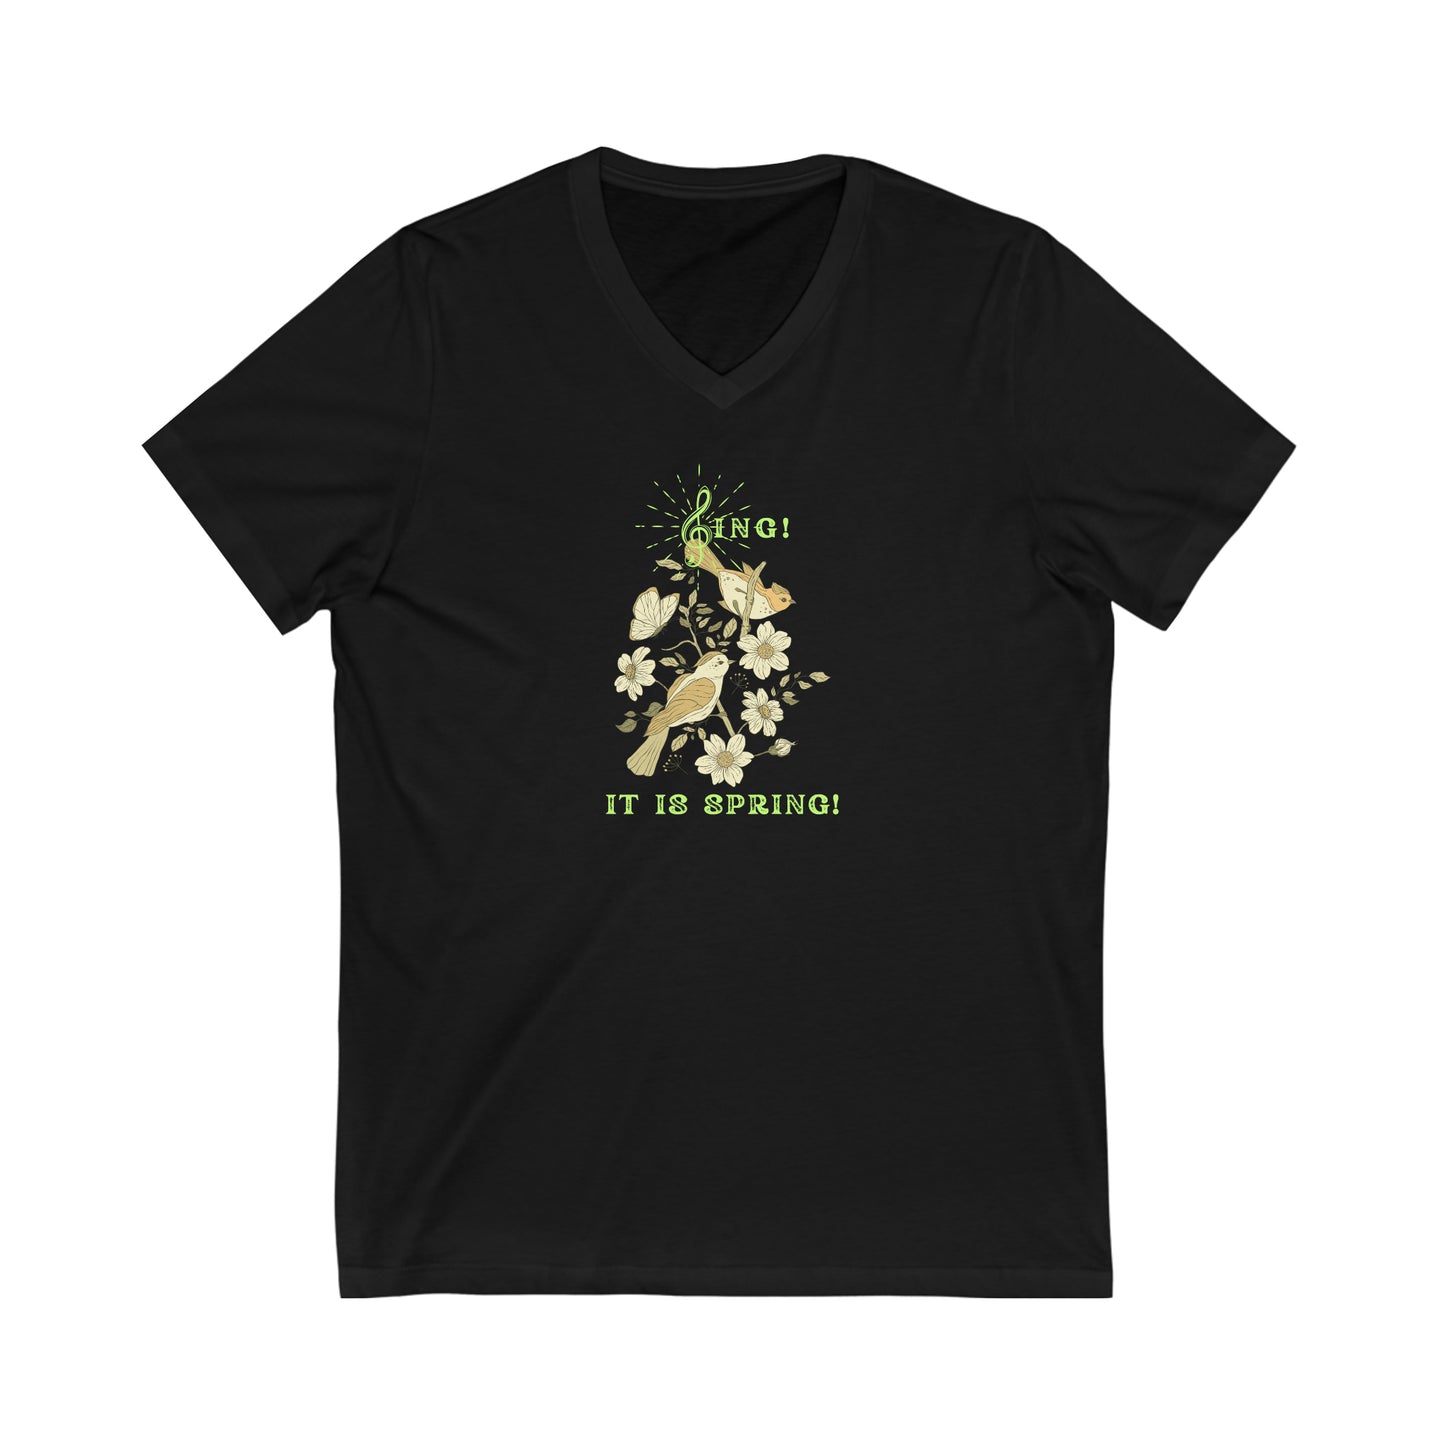 SING THIS IS SPRING UNISEX V  NECK  T SHIRT GIFT WITH GREEN FONT